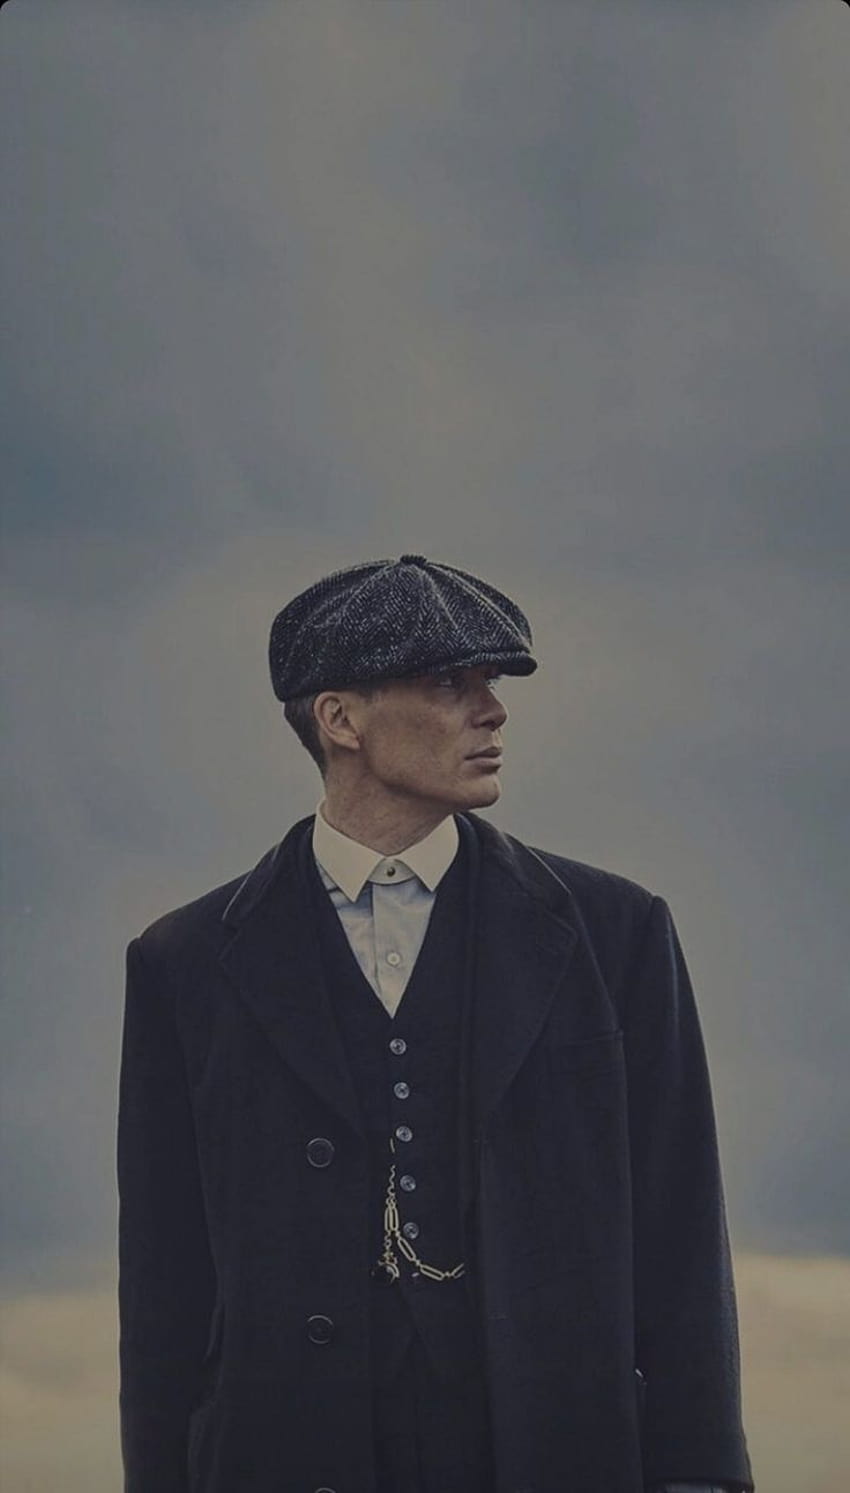 Wallpaper ID 367876  TV Show Peaky Blinders Phone Wallpaper Thomas Shelby  Cillian Murphy 1080x2280 free download